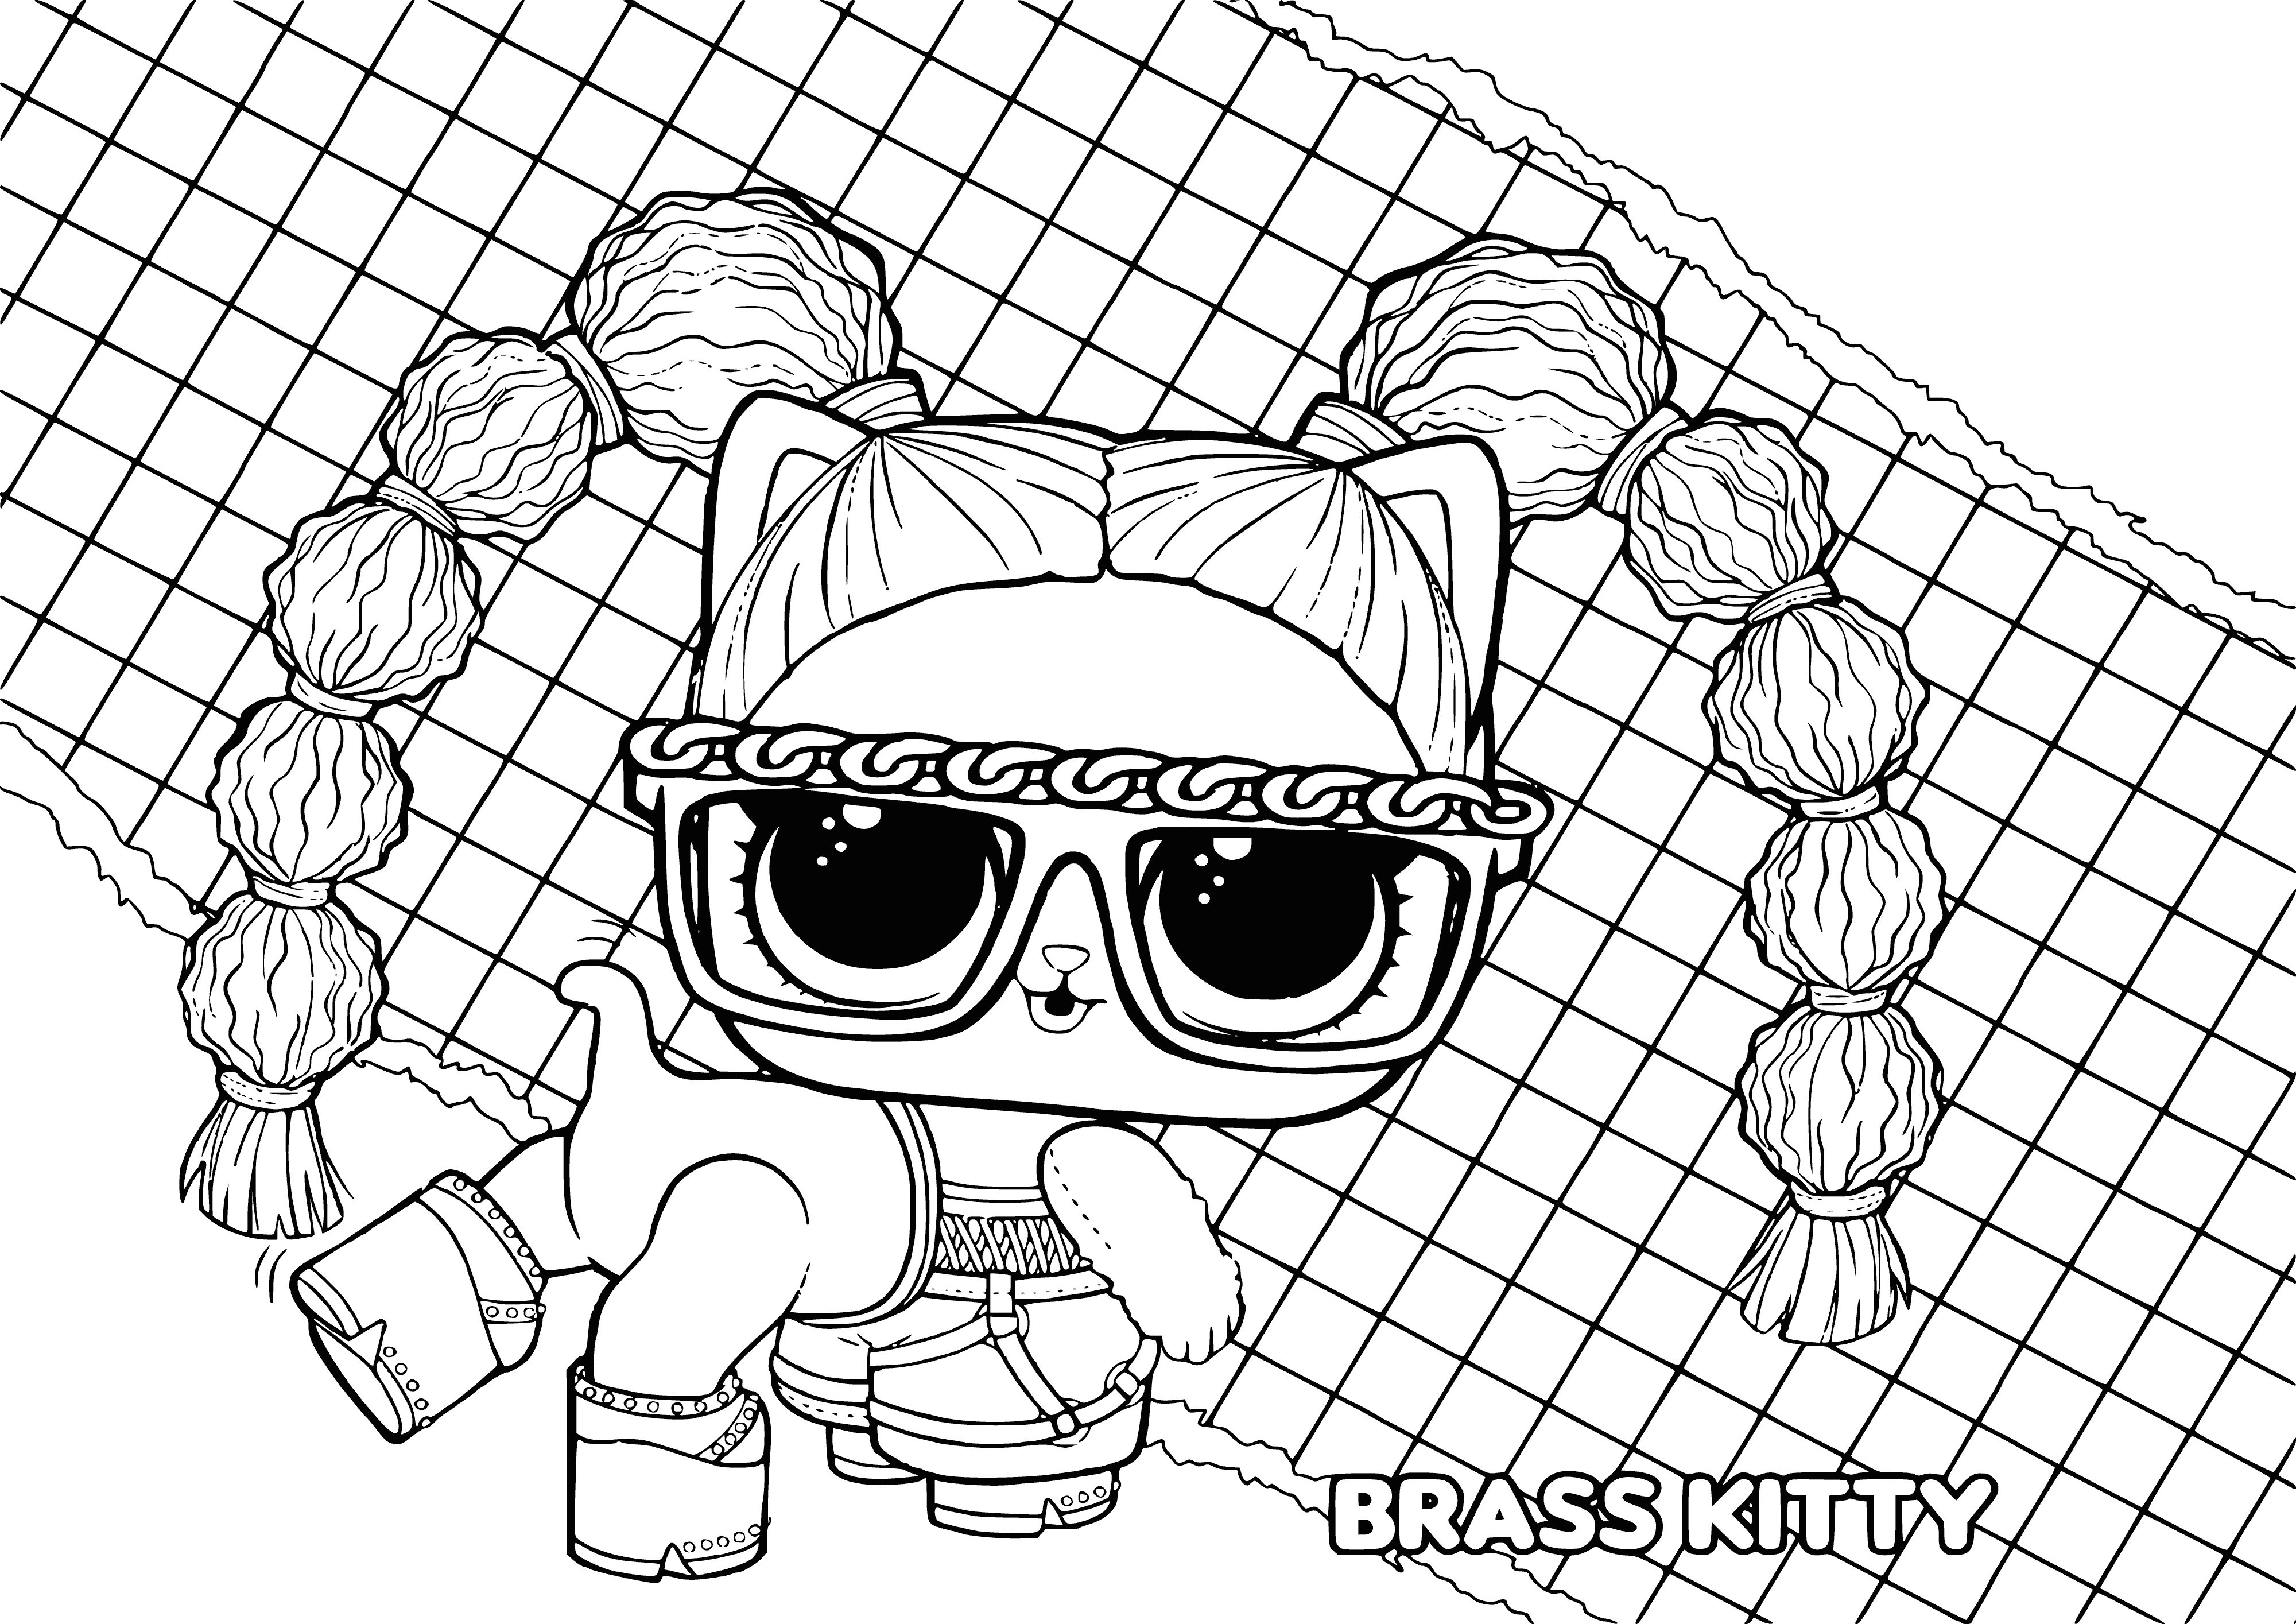 LOL pet Brass Kitty coloring page